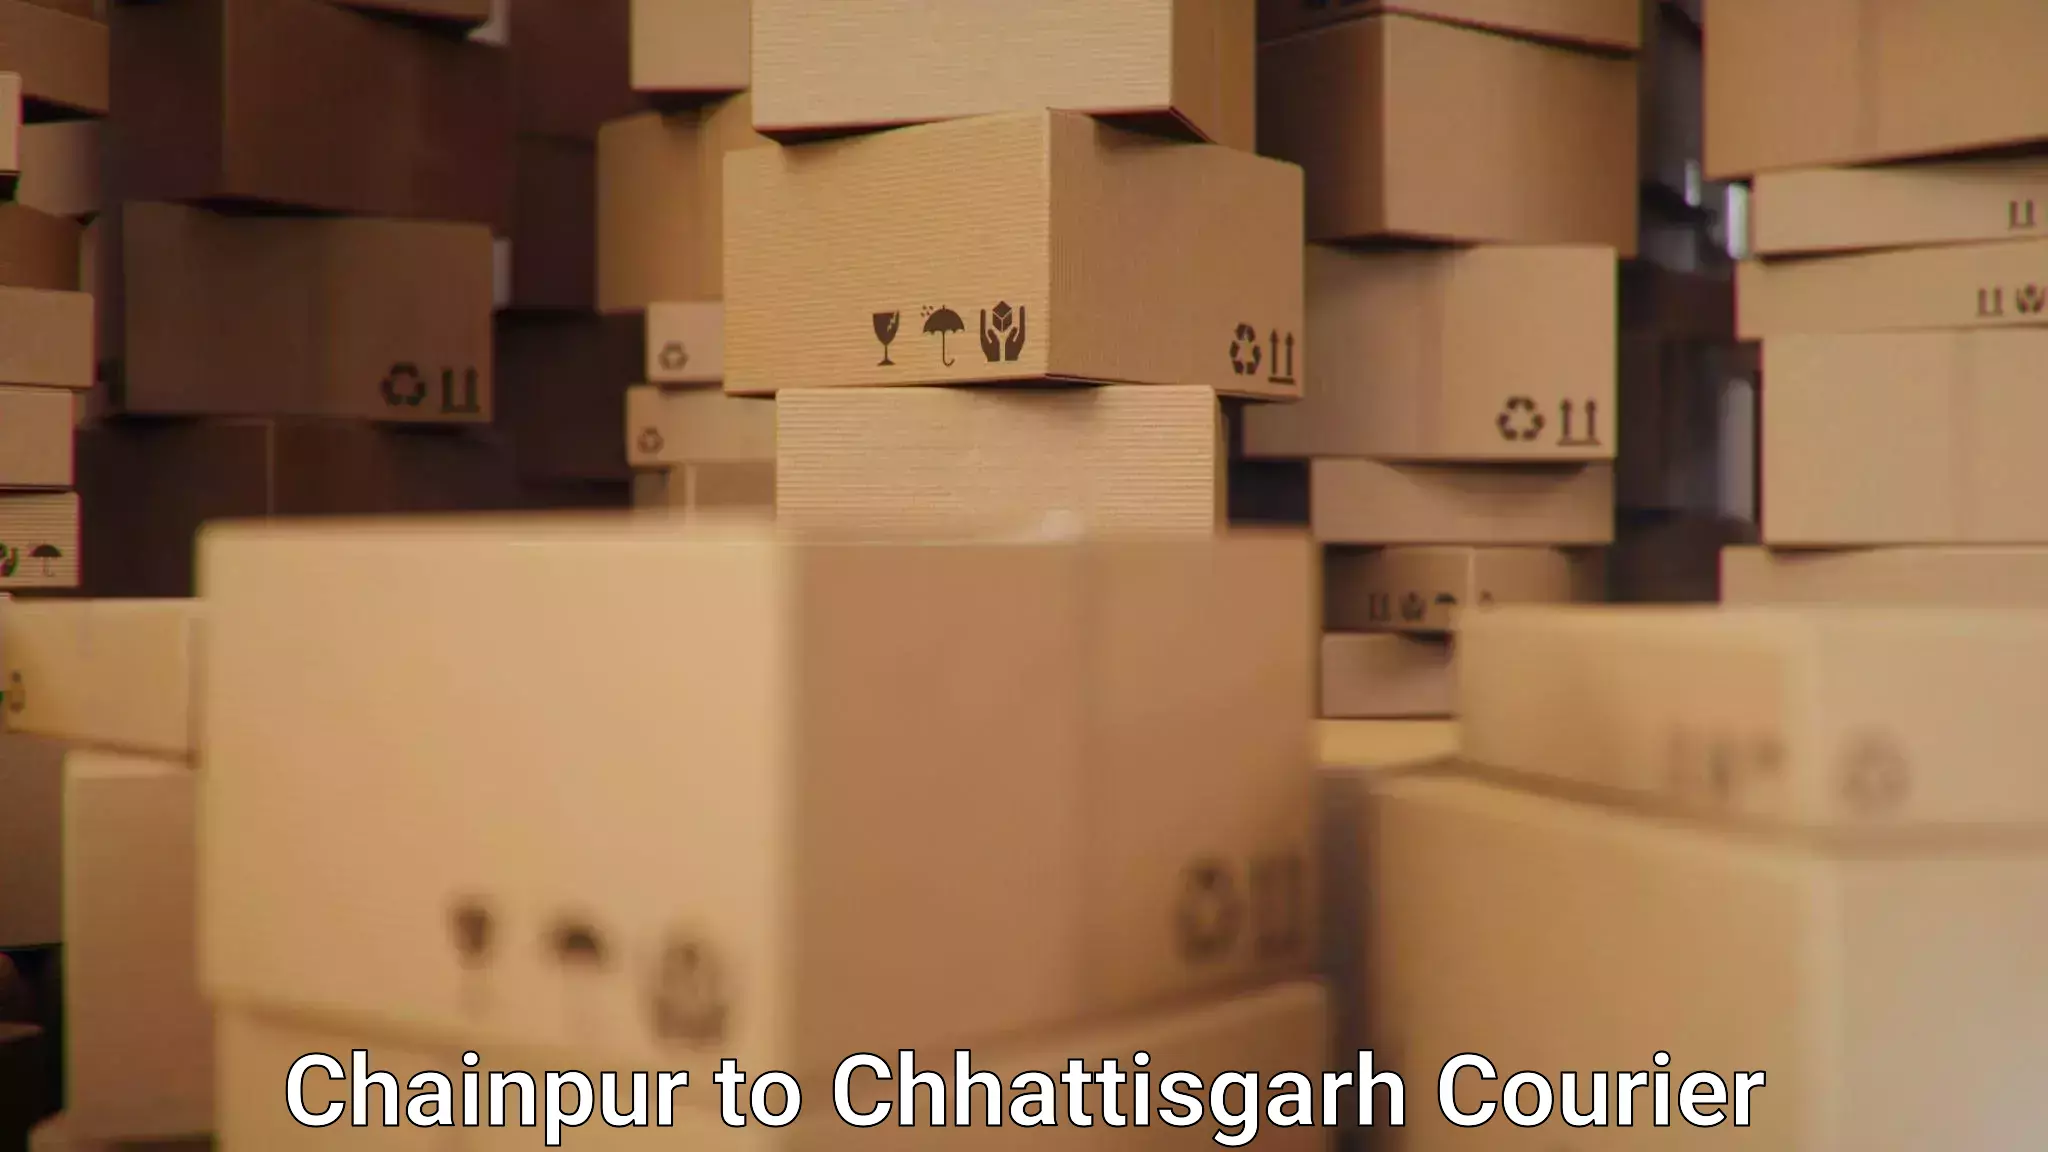 Reliable courier service Chainpur to Dhamtari